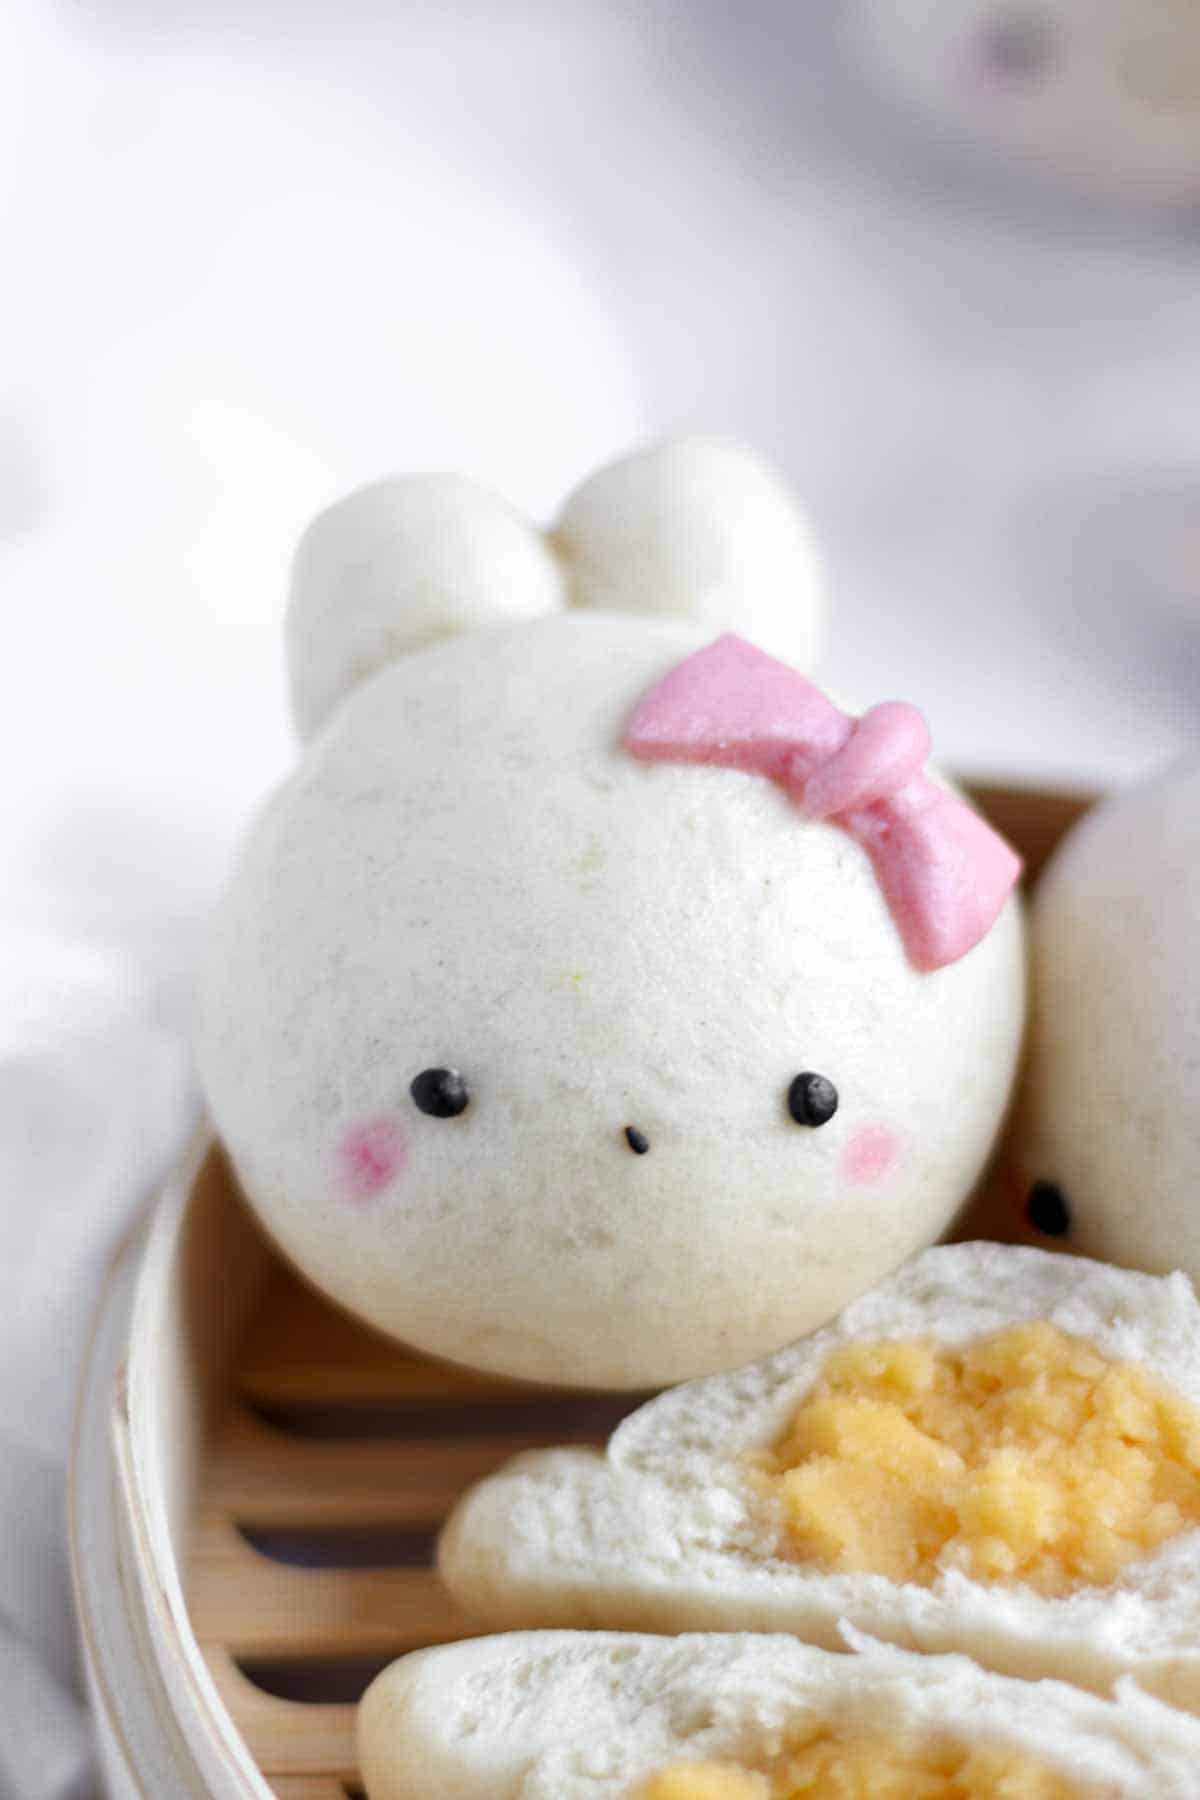 Chinese steamed bun filled with custard and shaped in a rabbit